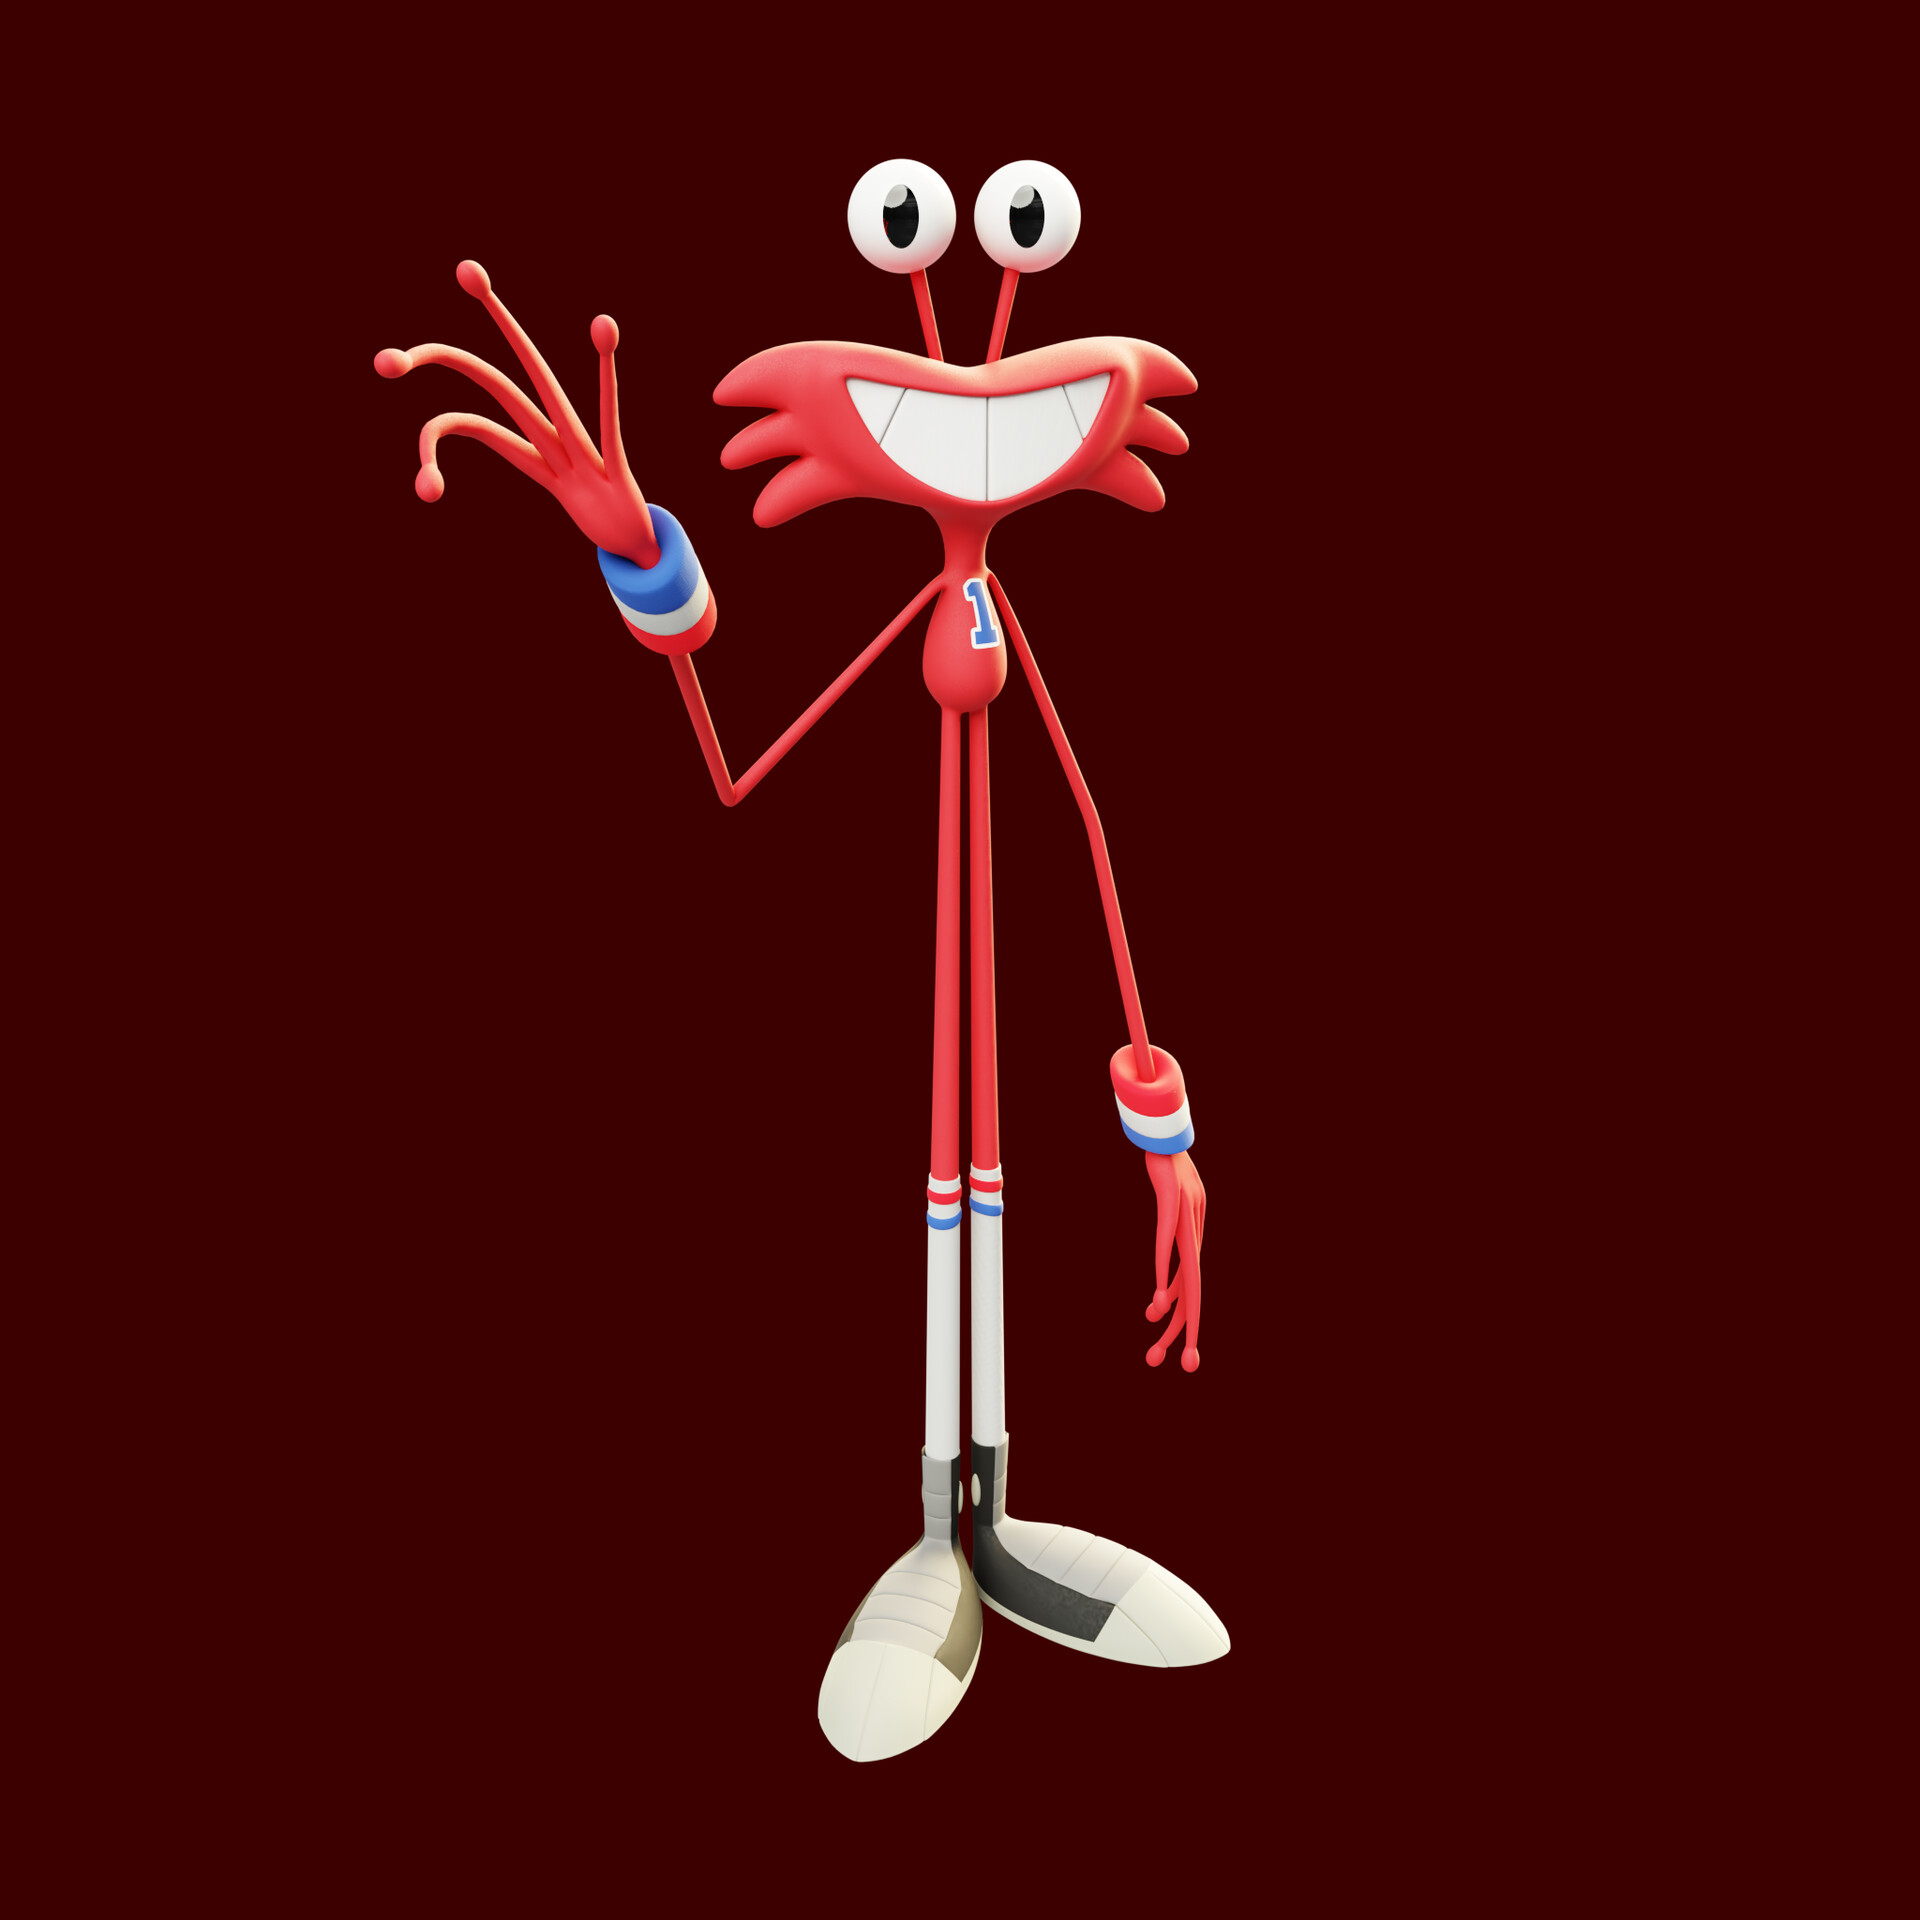 Foster's home for imaginary friends wilt